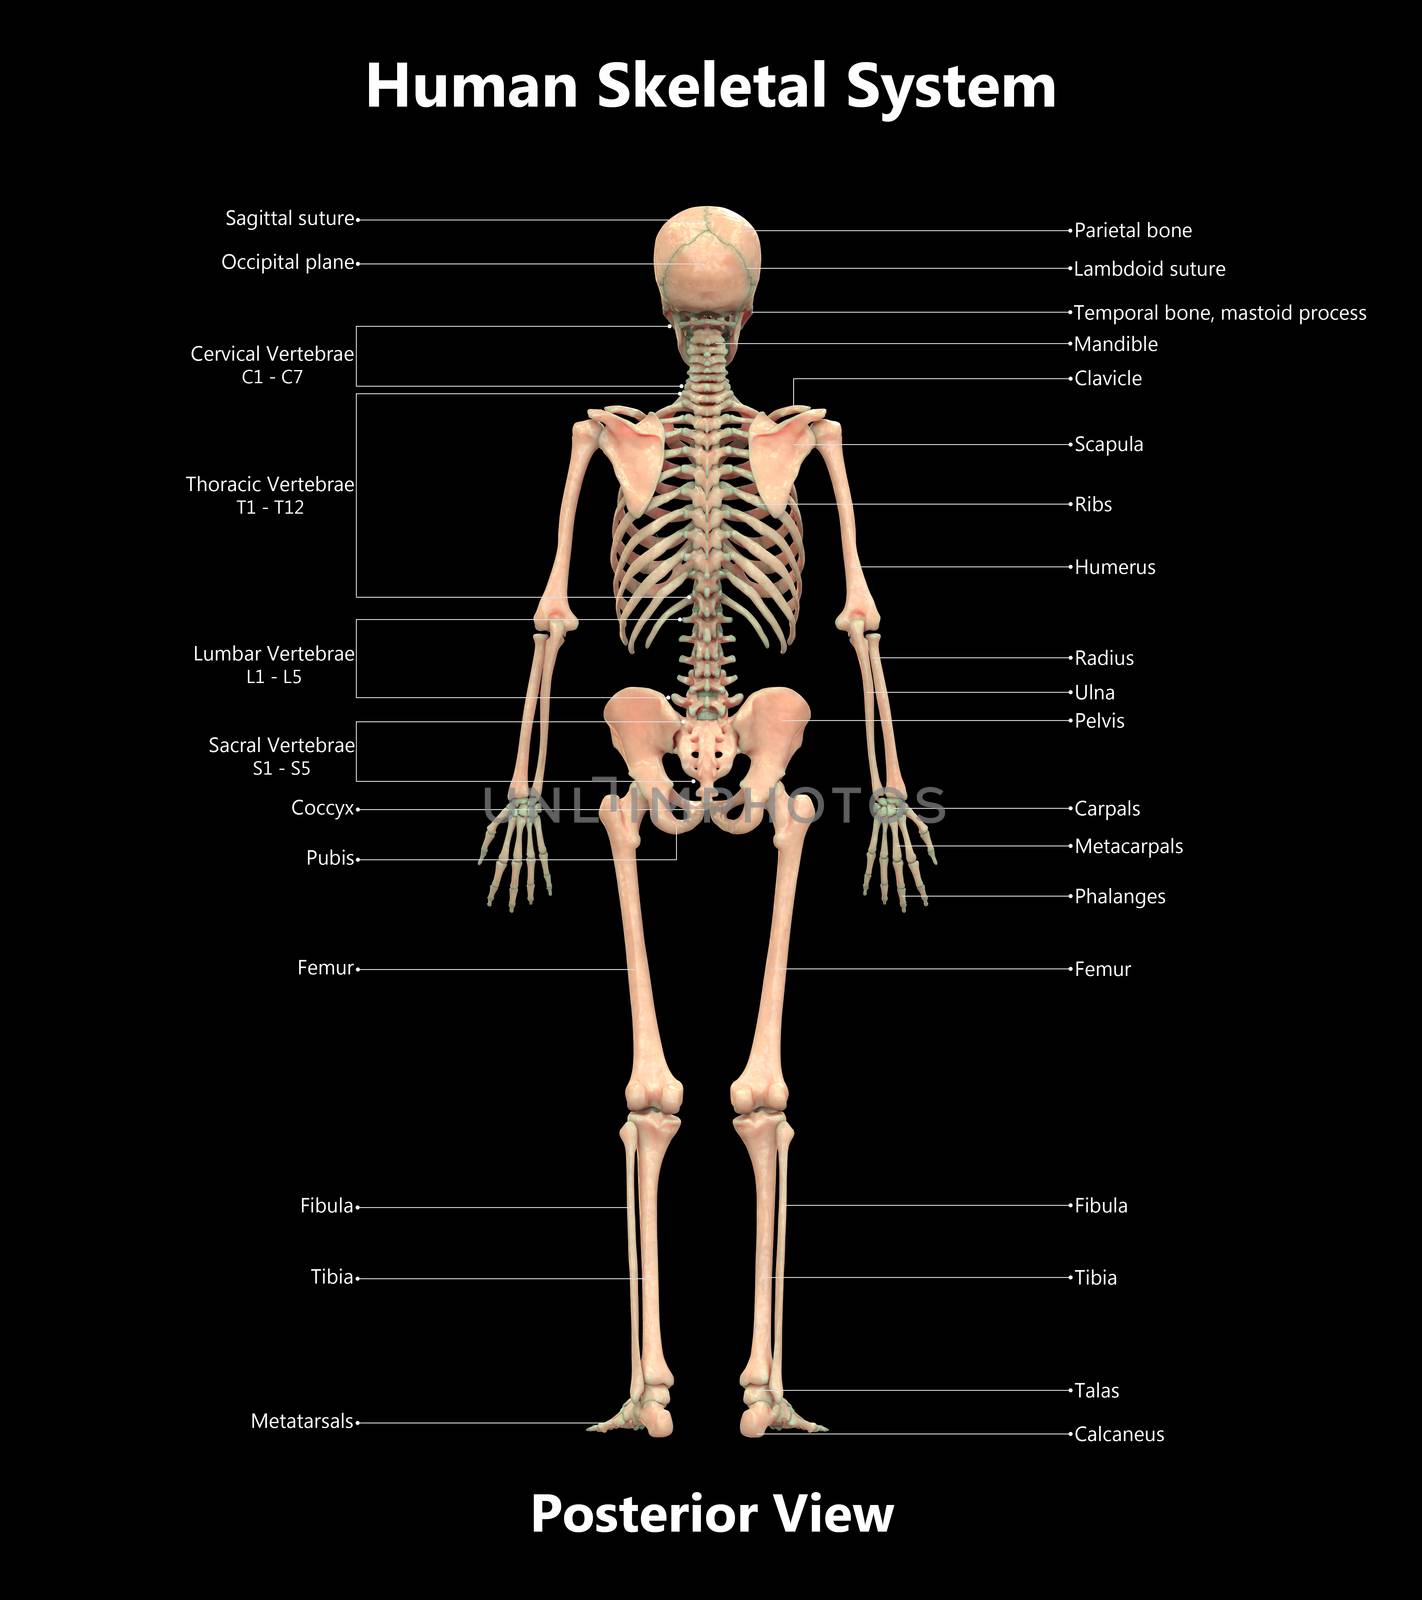 3D Illustration Concept of Human Skeleton System Bone Joints Described with Labels Anatomy Posterior View